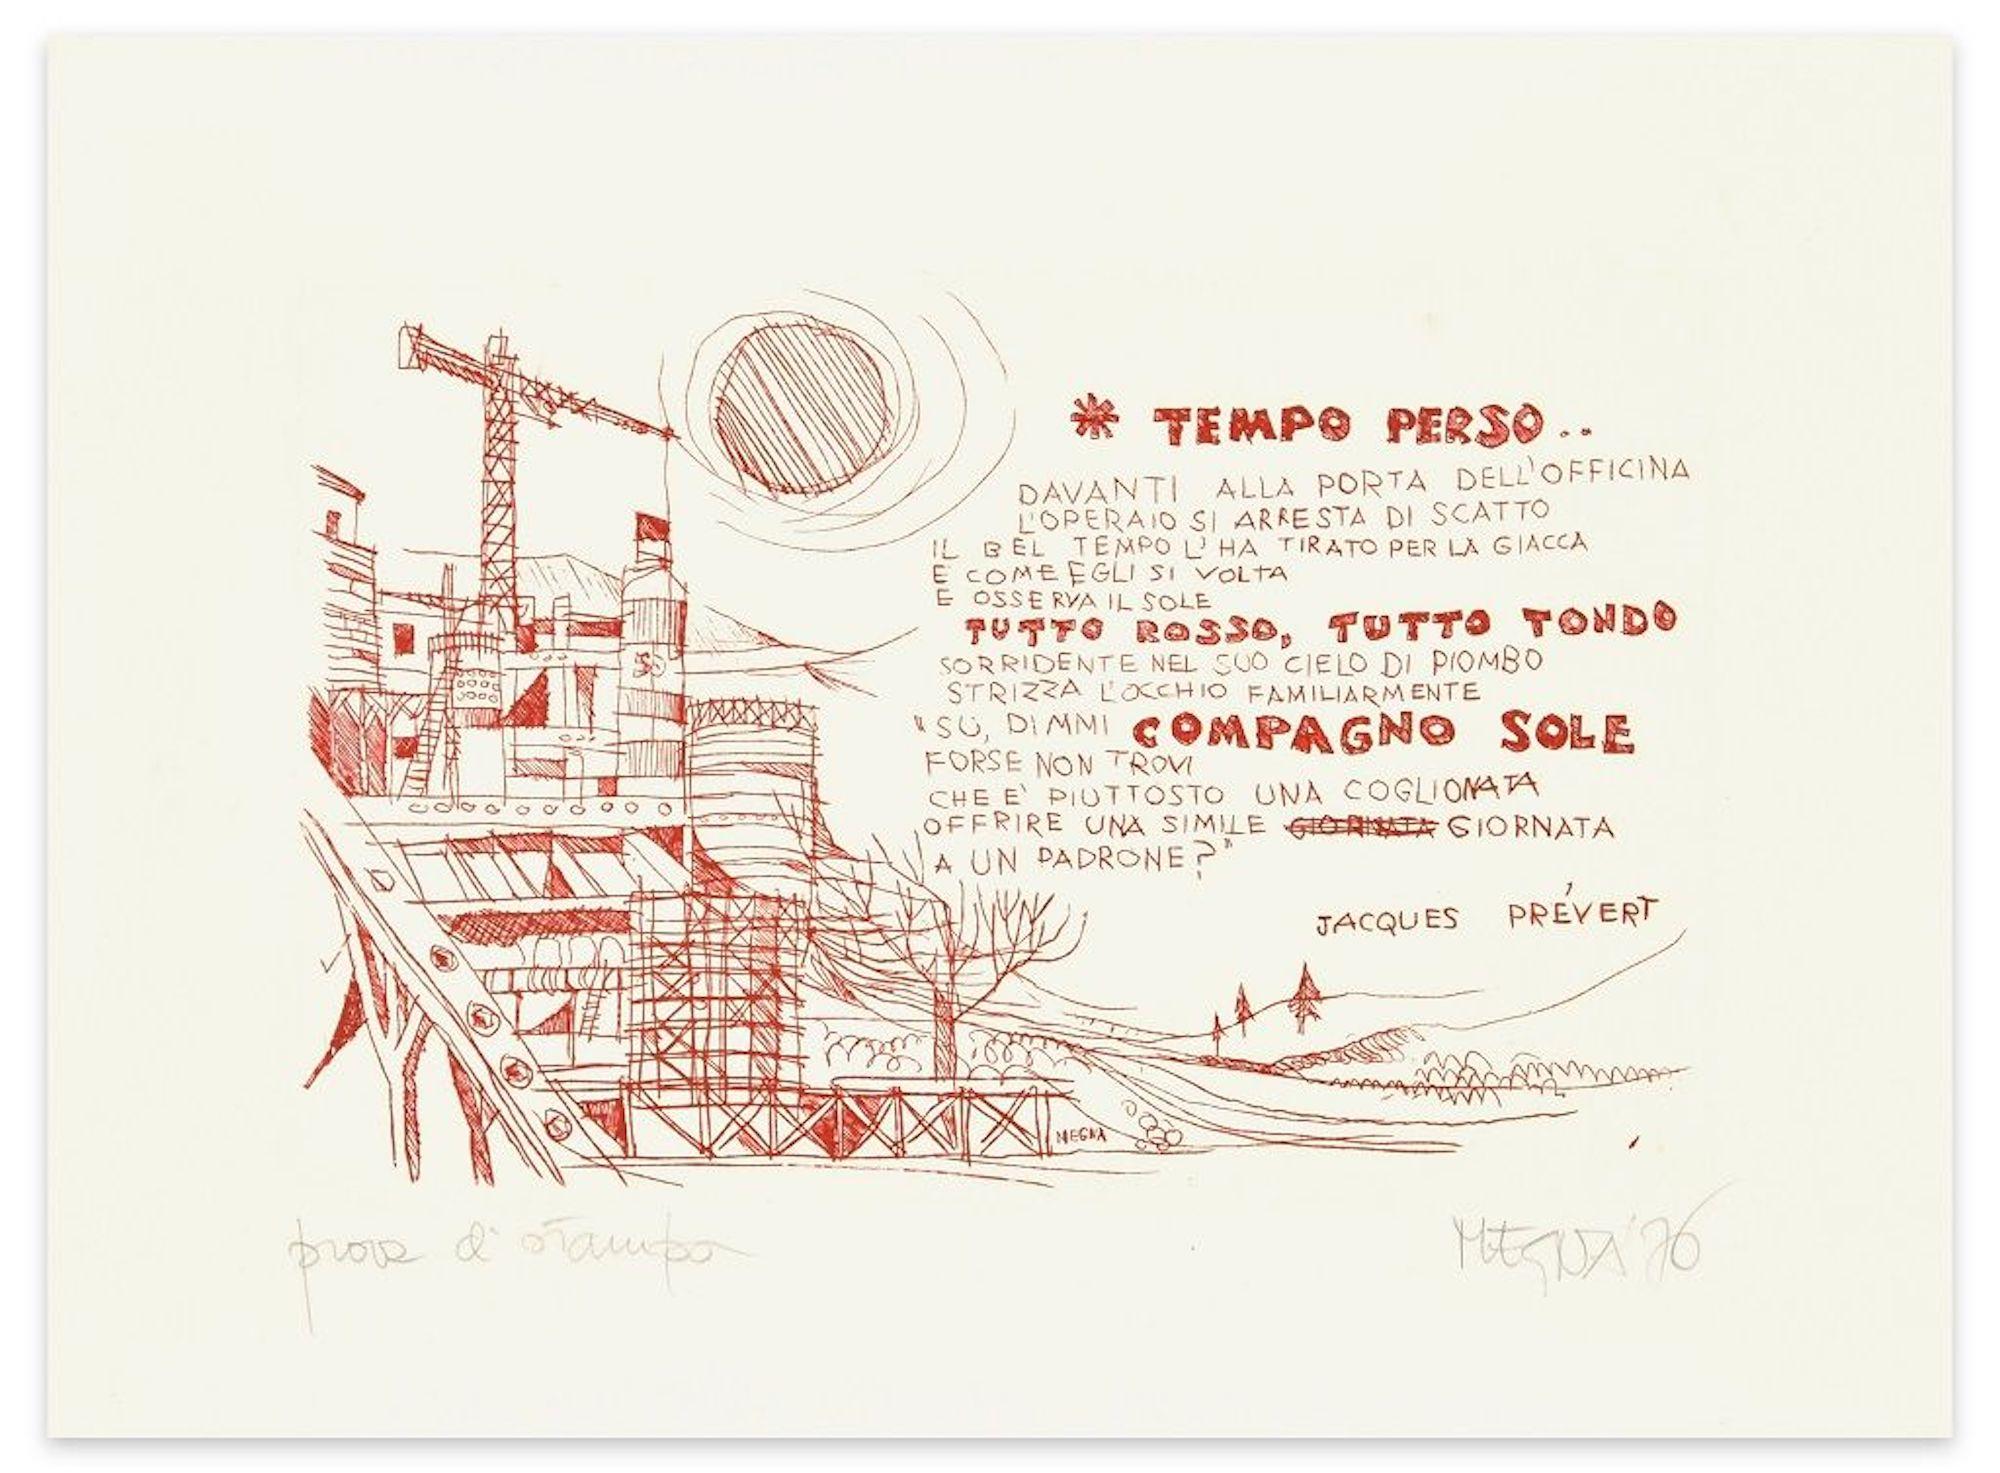 Image dimensions: 15.7 x 24.6 cm.

Lost Time is an original etching on paper, realized with the red ink in 1976 by the Italian artist Giuseppe Megna.

Hand-signed and dated in pencil on lower right margin.

This is a splendid artist's proof